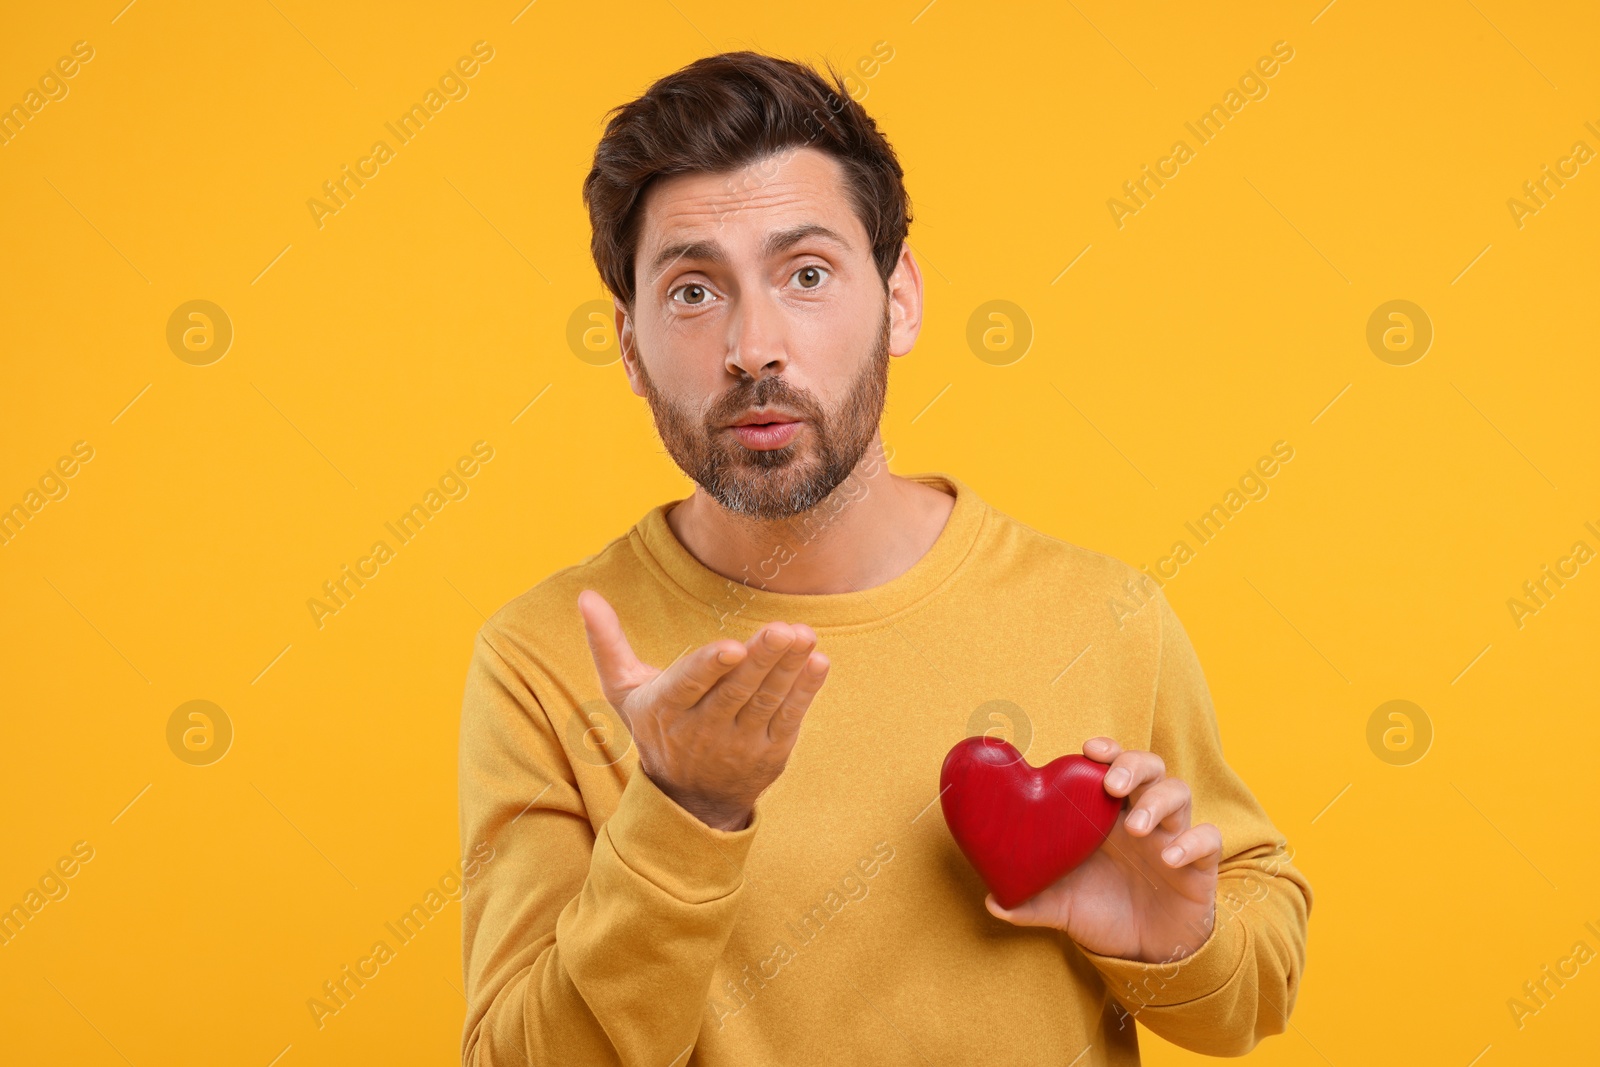 Photo of Man holding red heart and blowing kiss on orange background